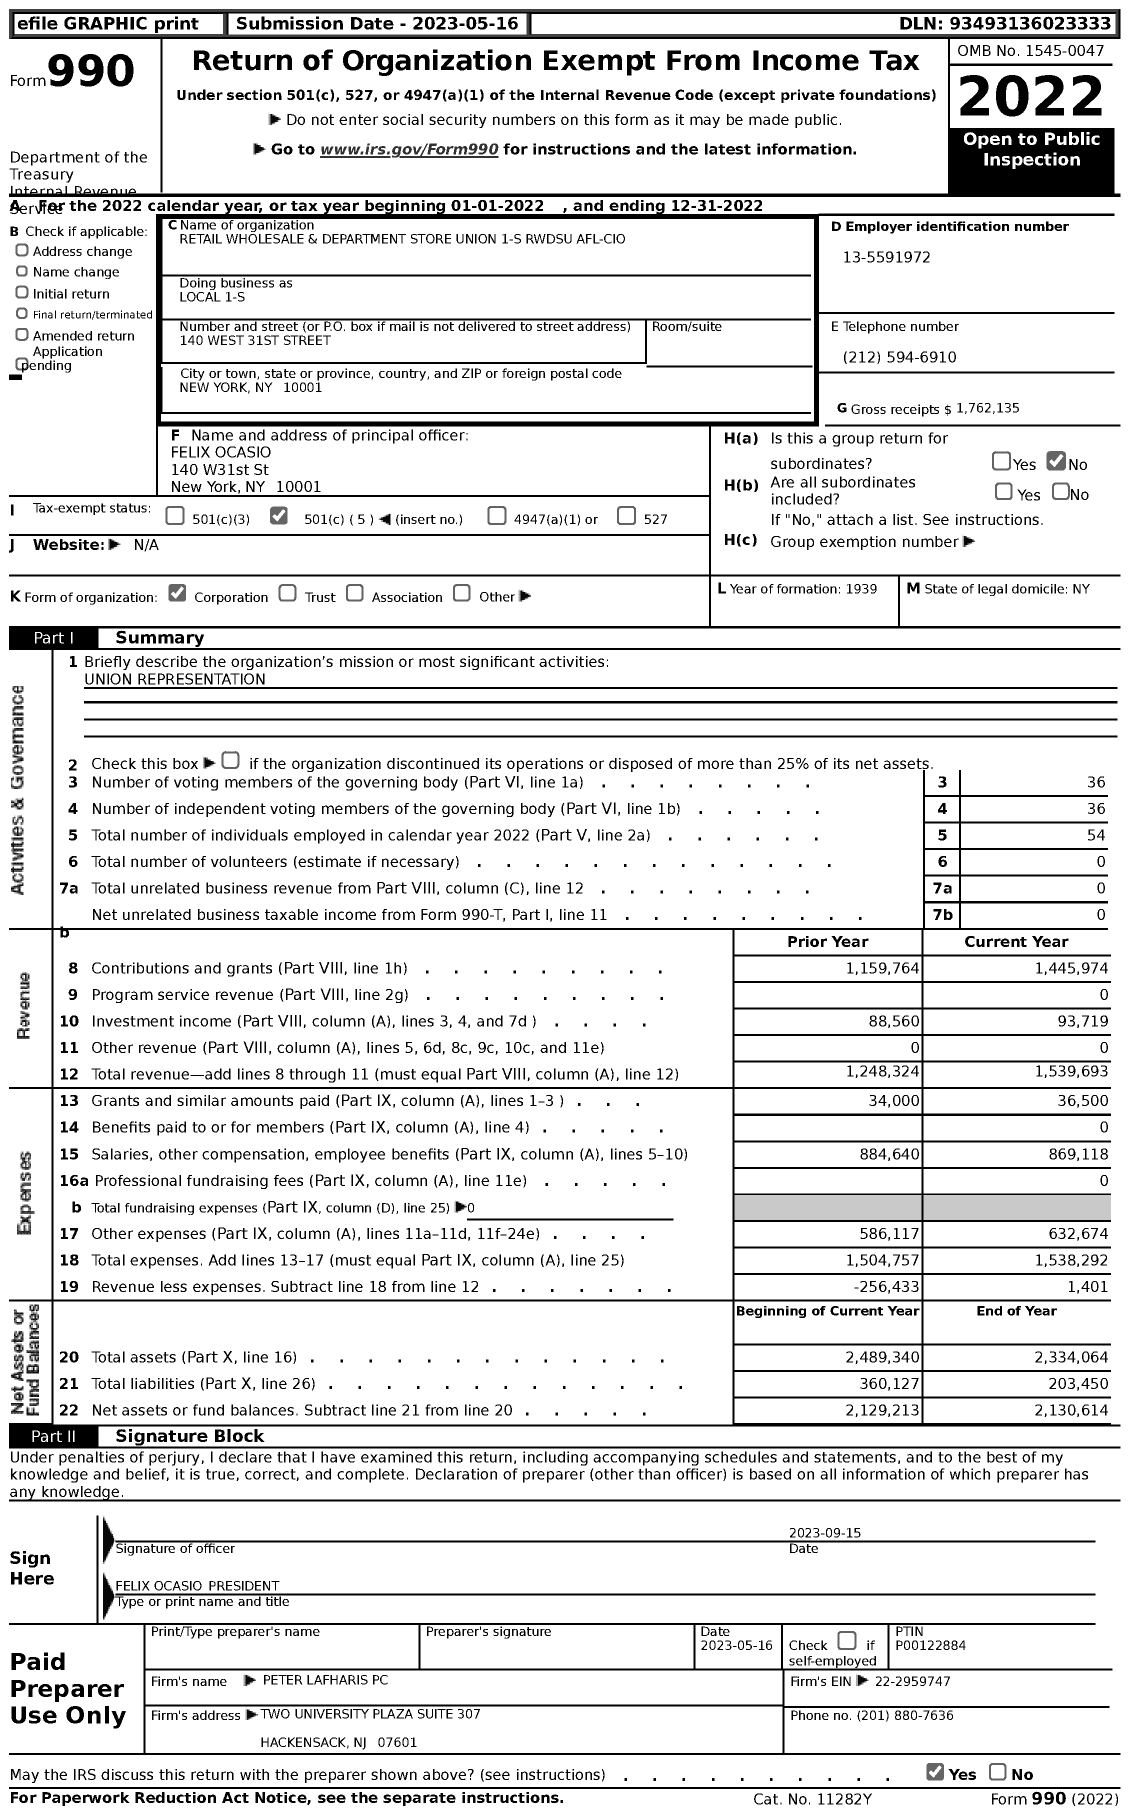 Image of first page of 2022 Form 990 for Local 1-s (RWDSU)